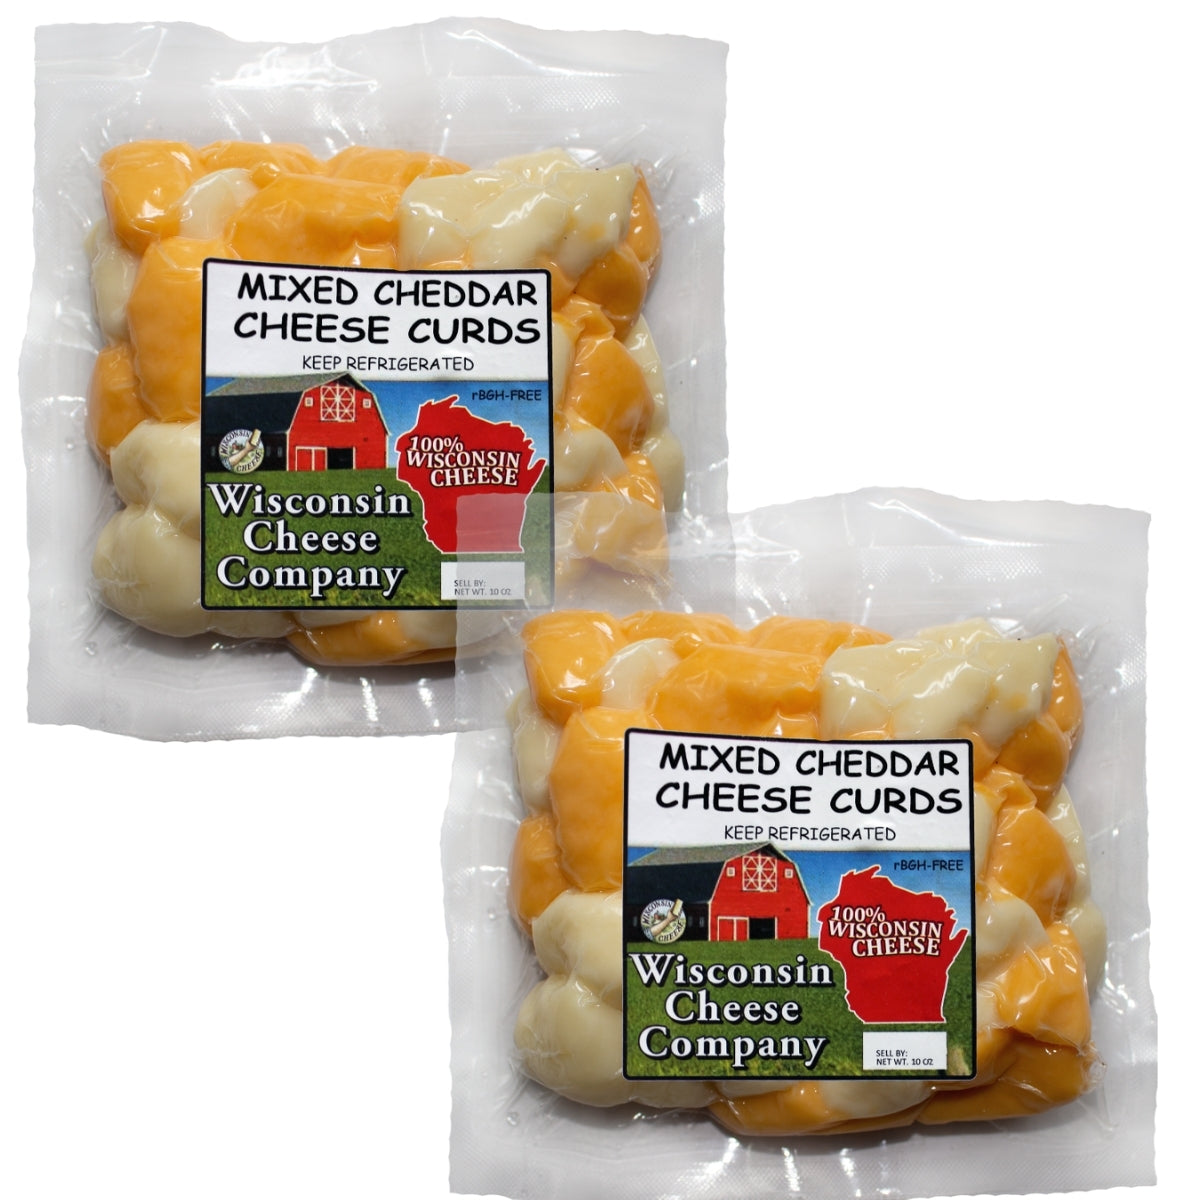 Mixed Cheddar Cheese Curds